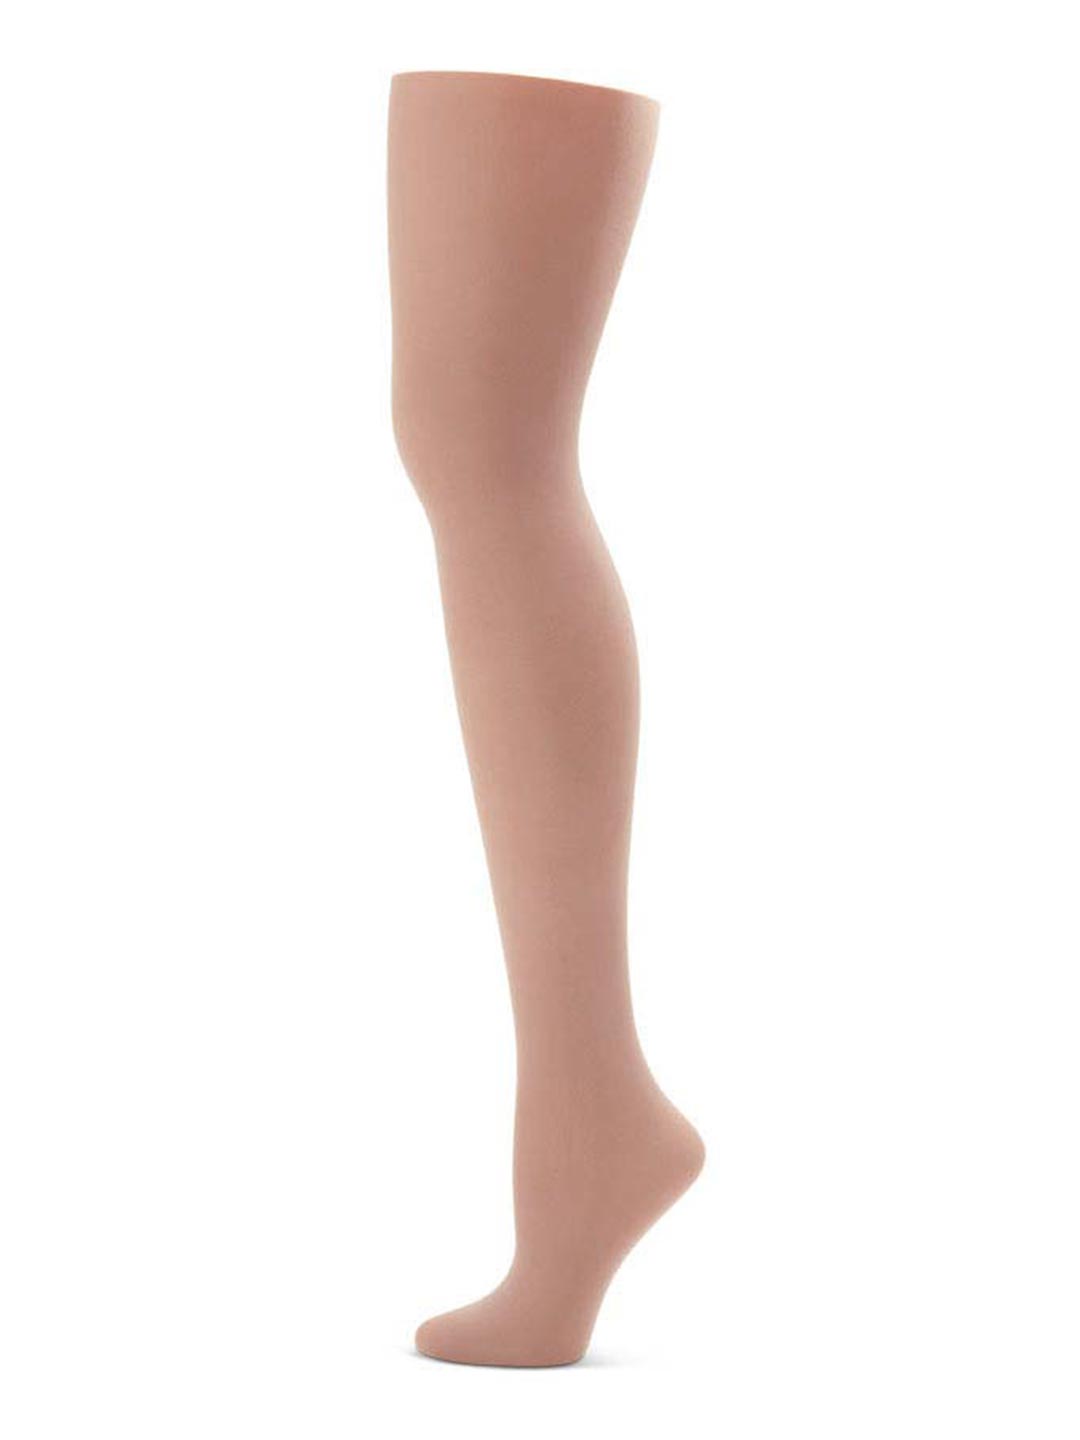 Capezio Ultra Soft Footed Tights Child Size 8-12yrs 1915C